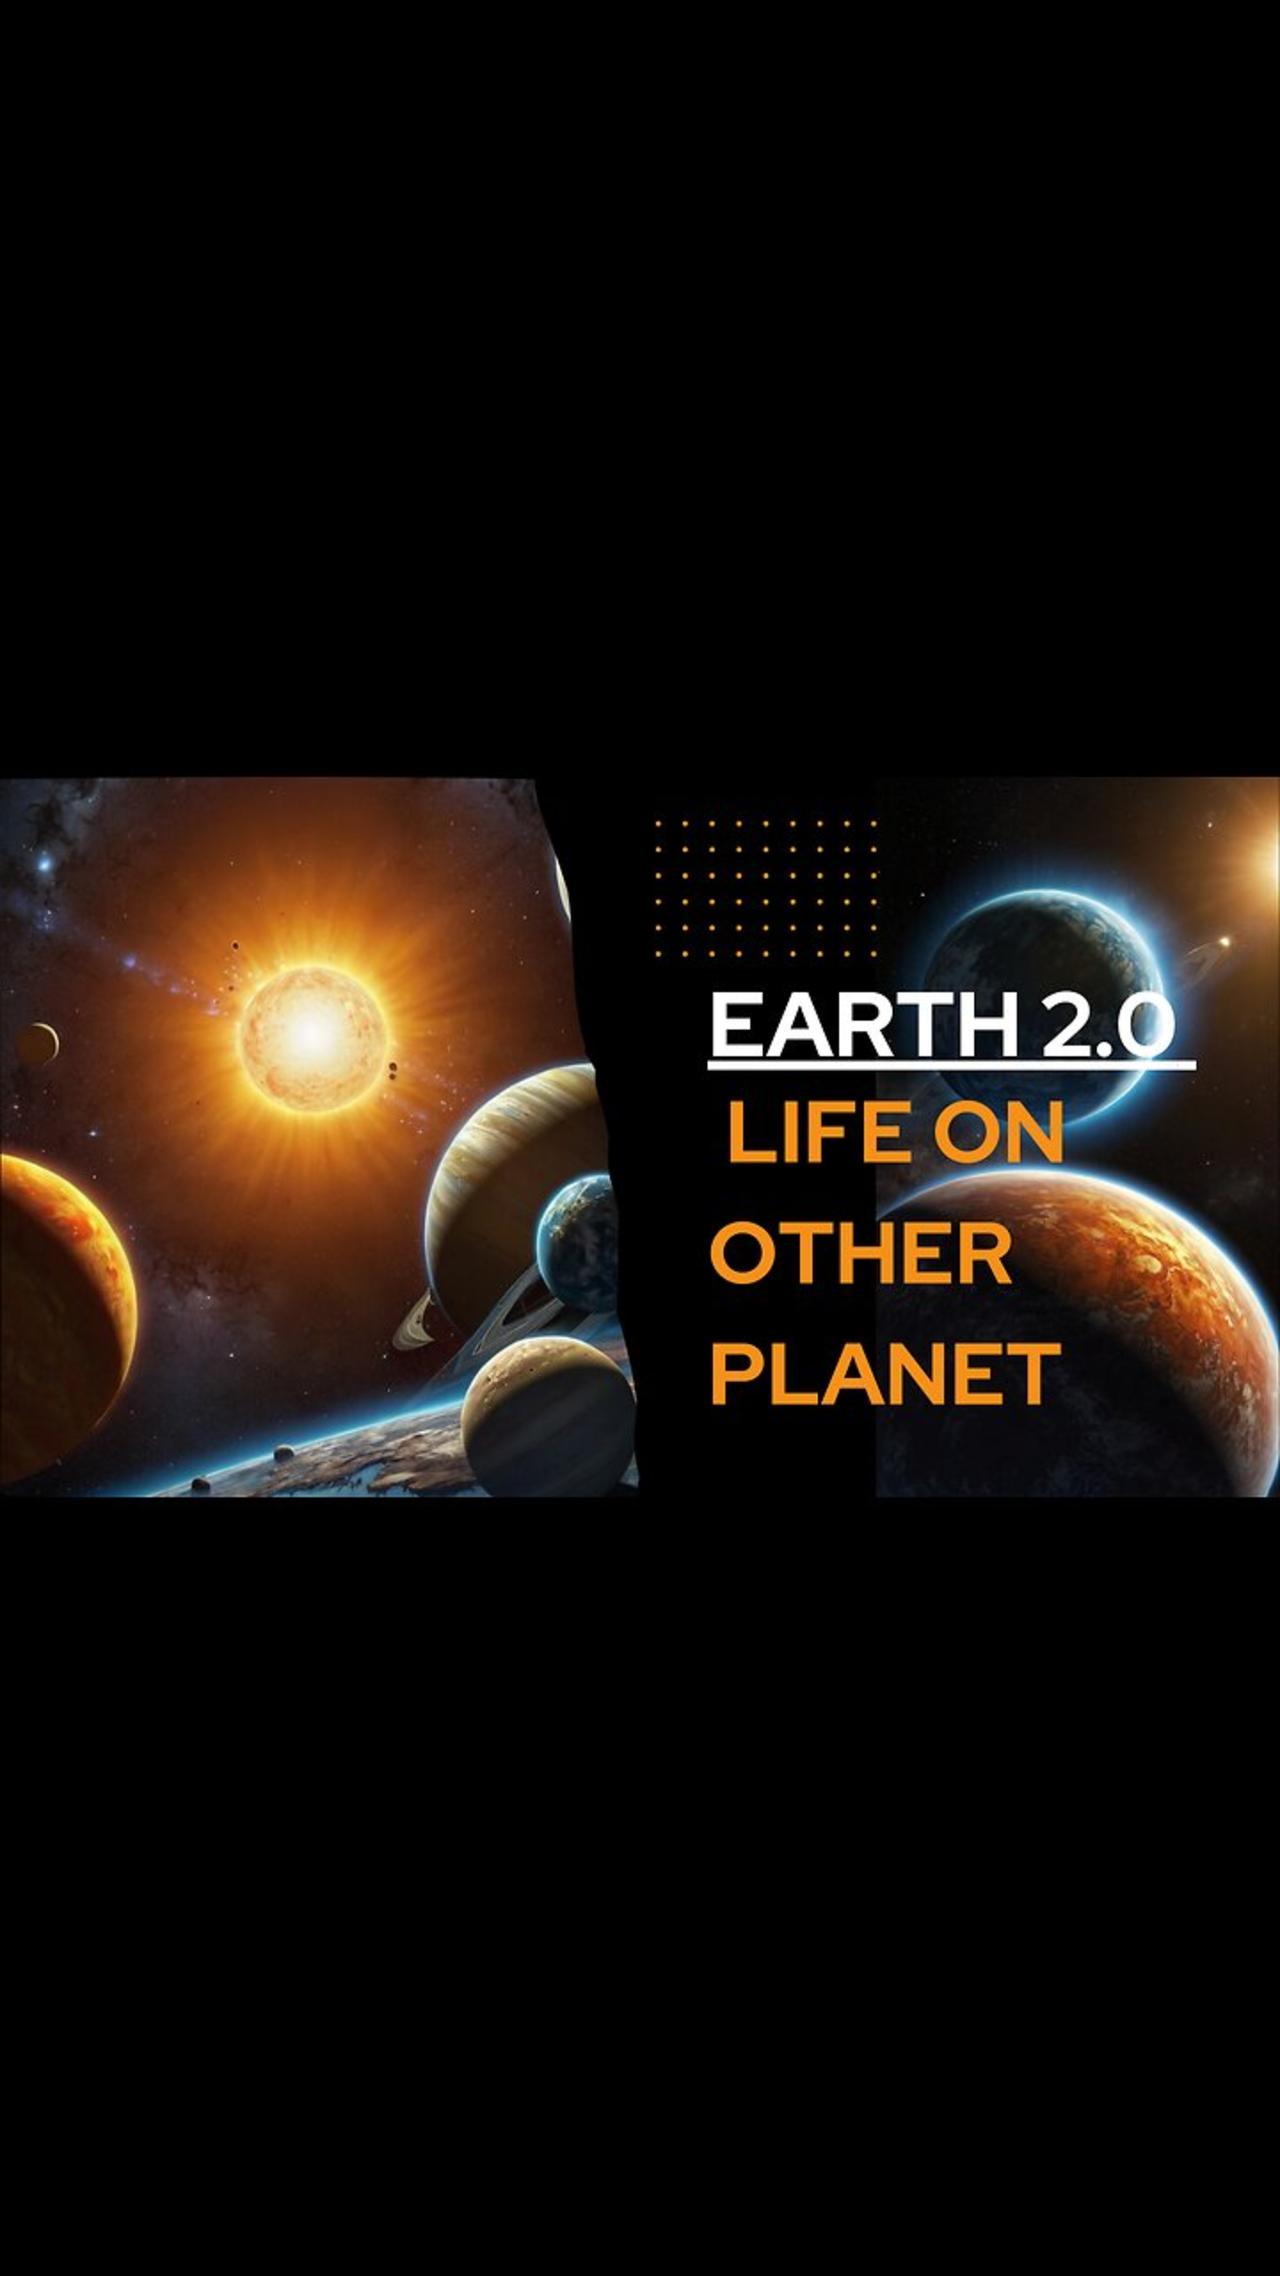 Earth 2.0 | LHS 1140 b A Super-Earth Candidate in the Habitable Zone | Super-Earth with Water Ocean